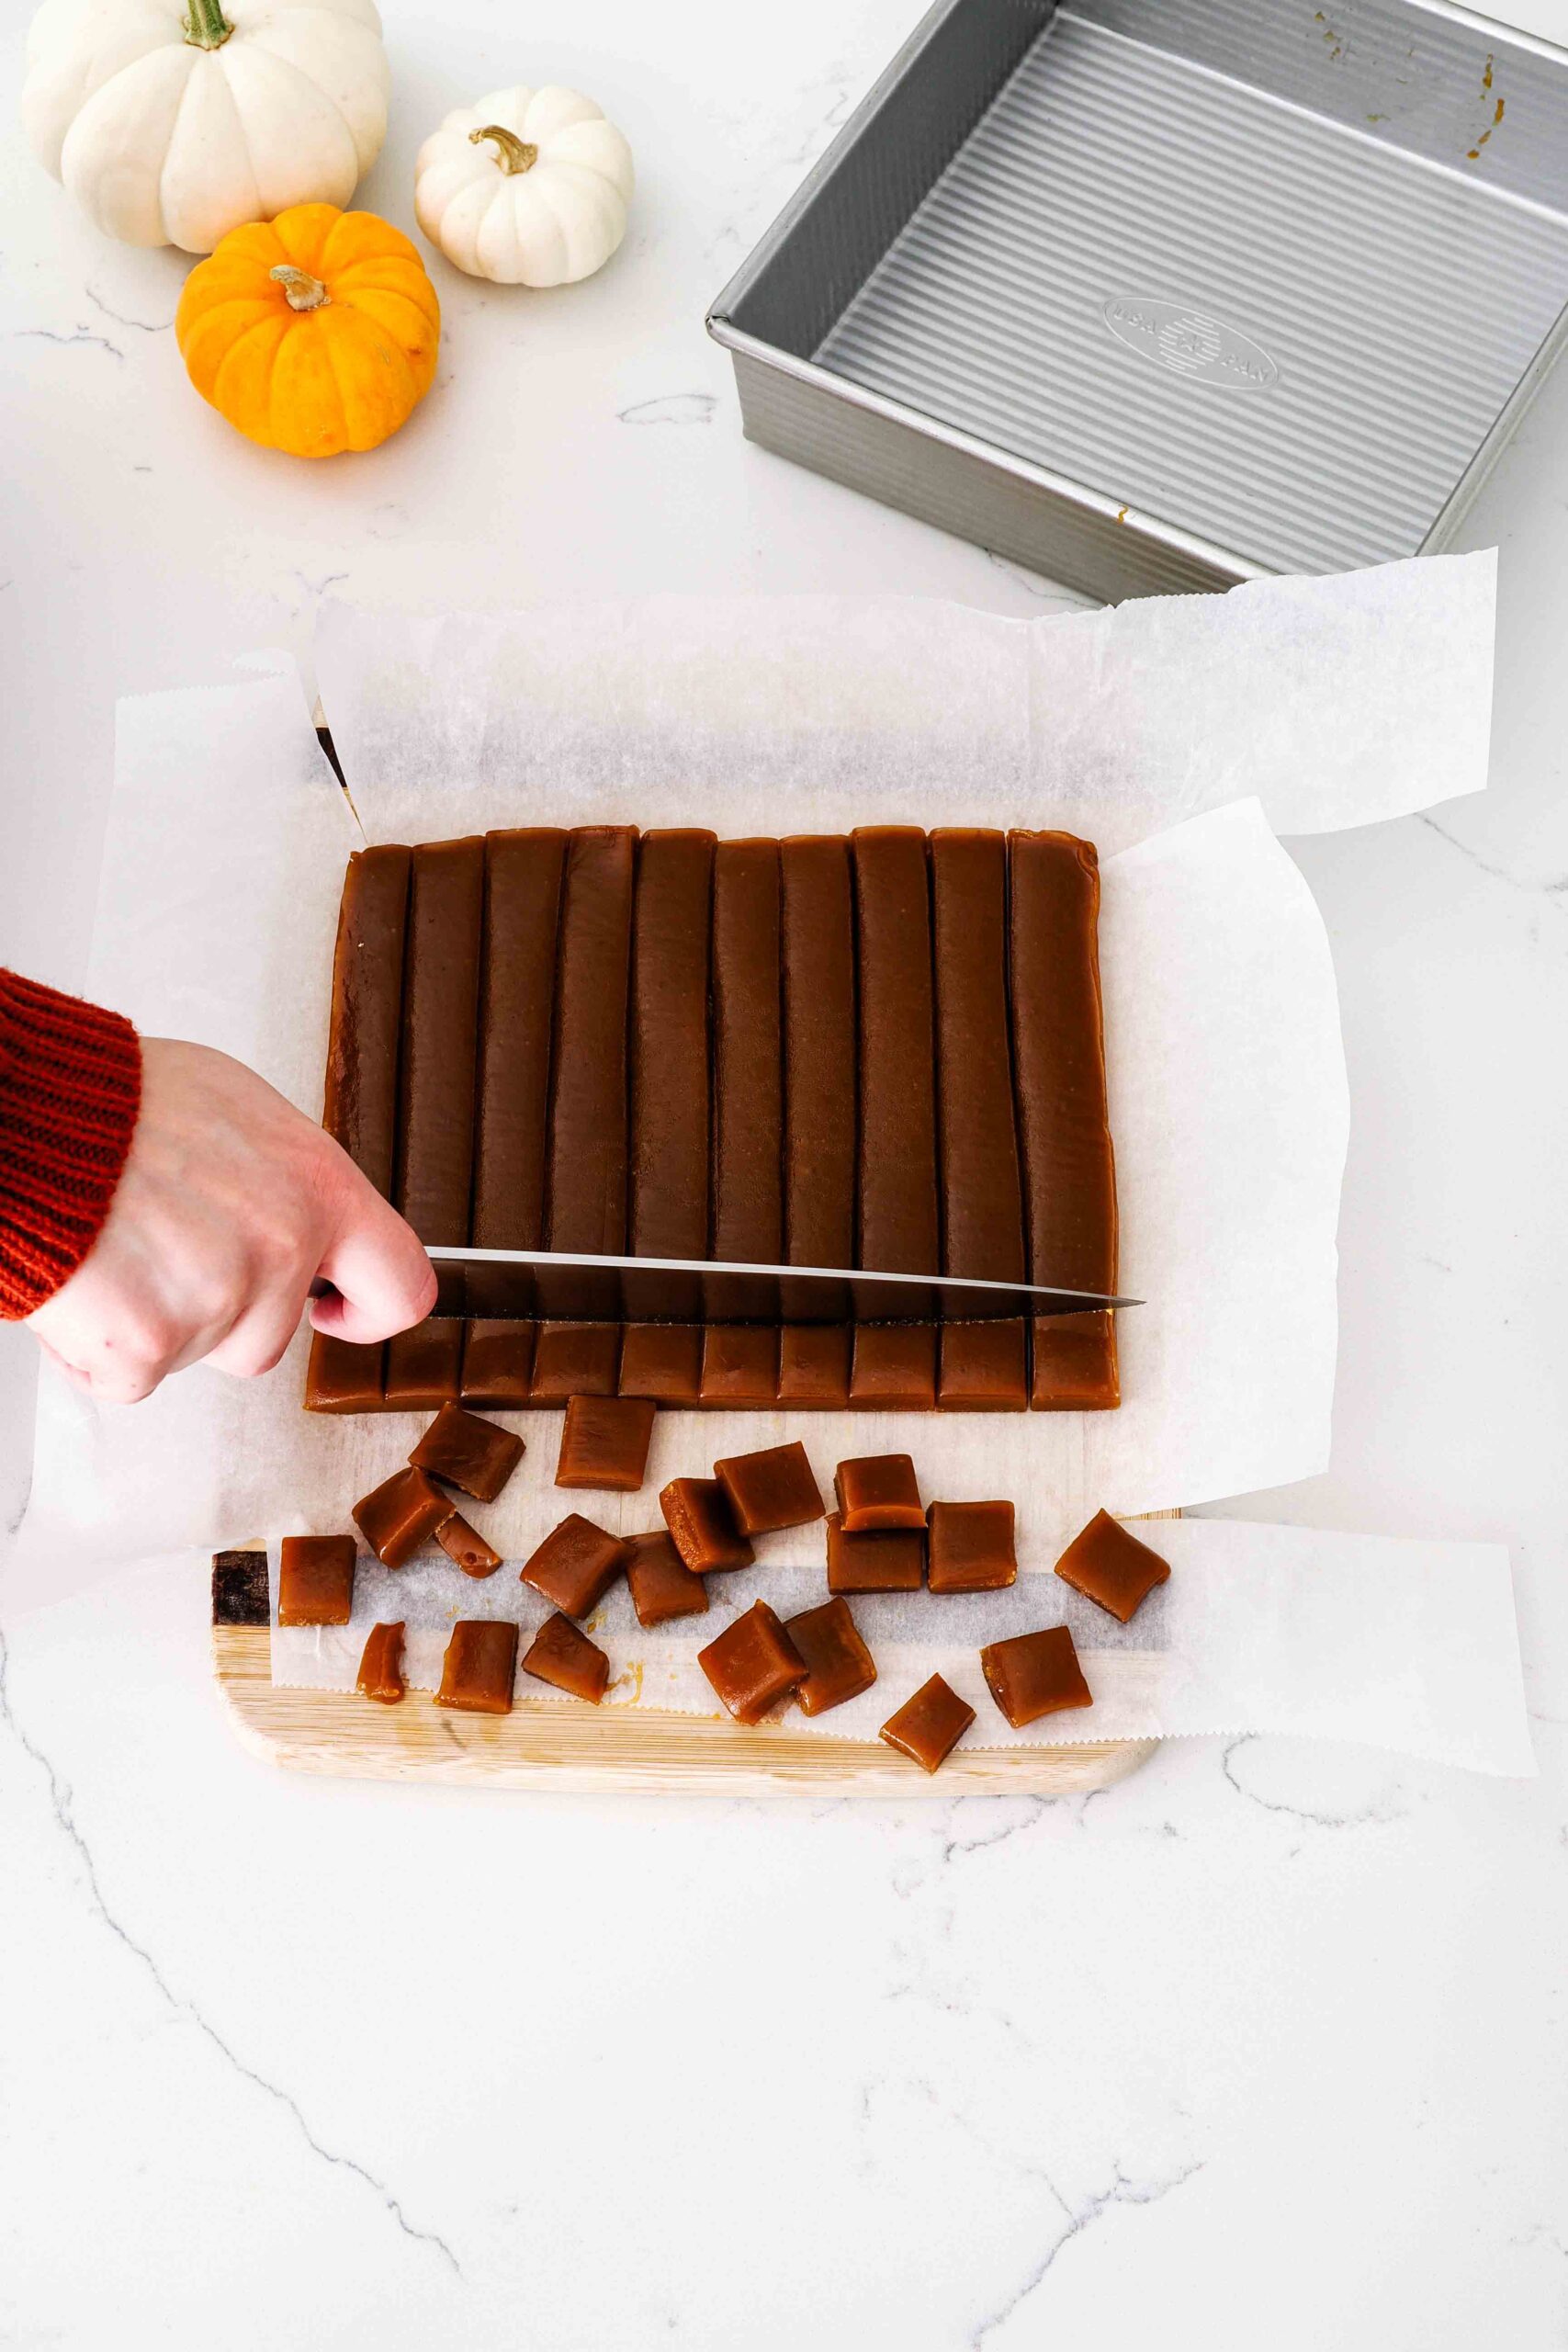 A knife cuts individual caramel candies out of a slab of pumpkin spice caramel.